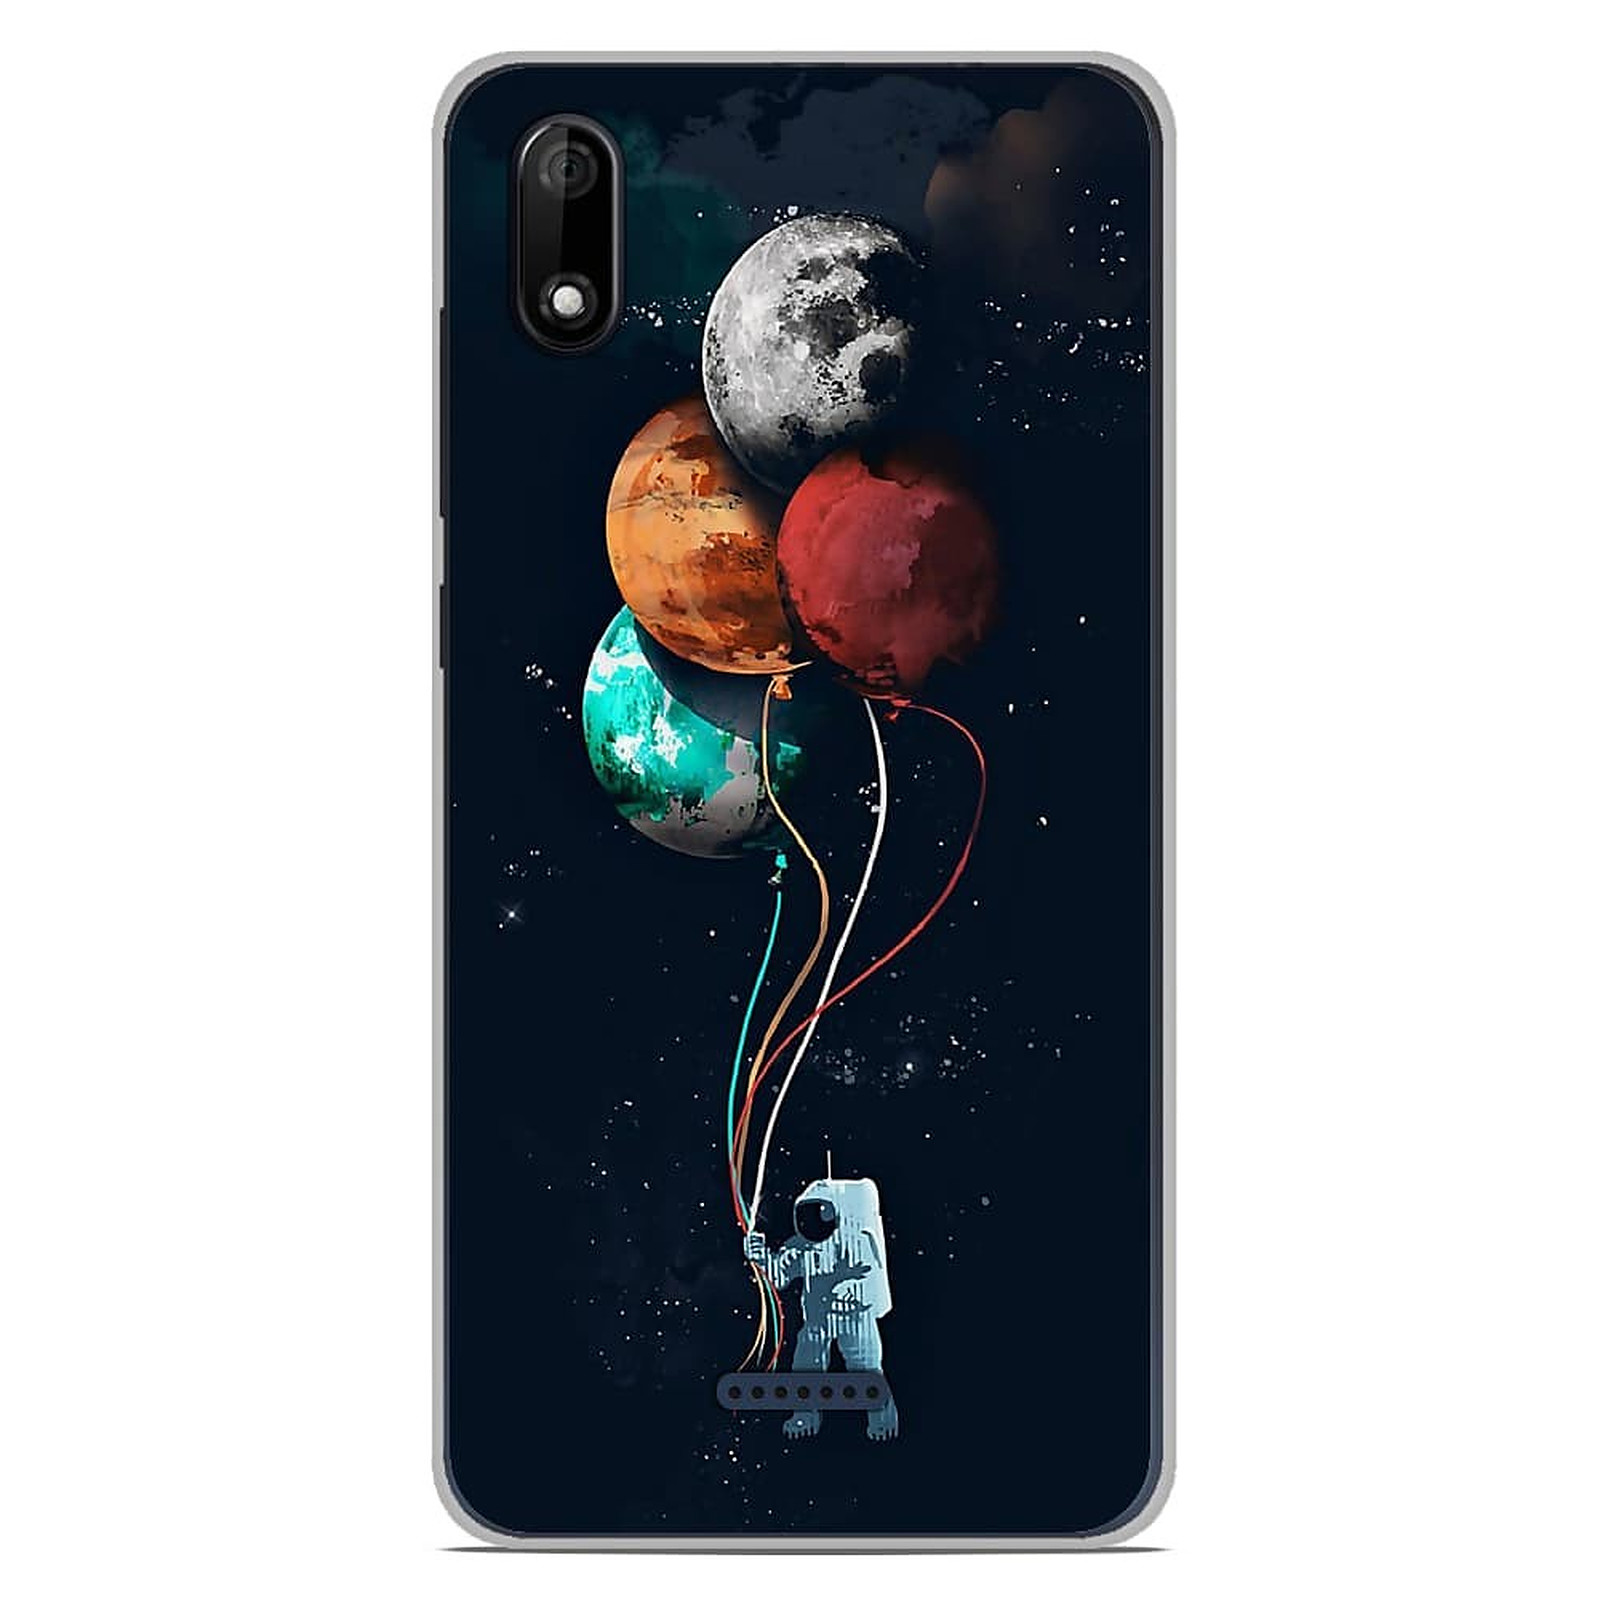 1001 Coques Coque silicone gel Wiko Y50 motif Cosmonaute aux Ballons - Coque telephone 1001Coques